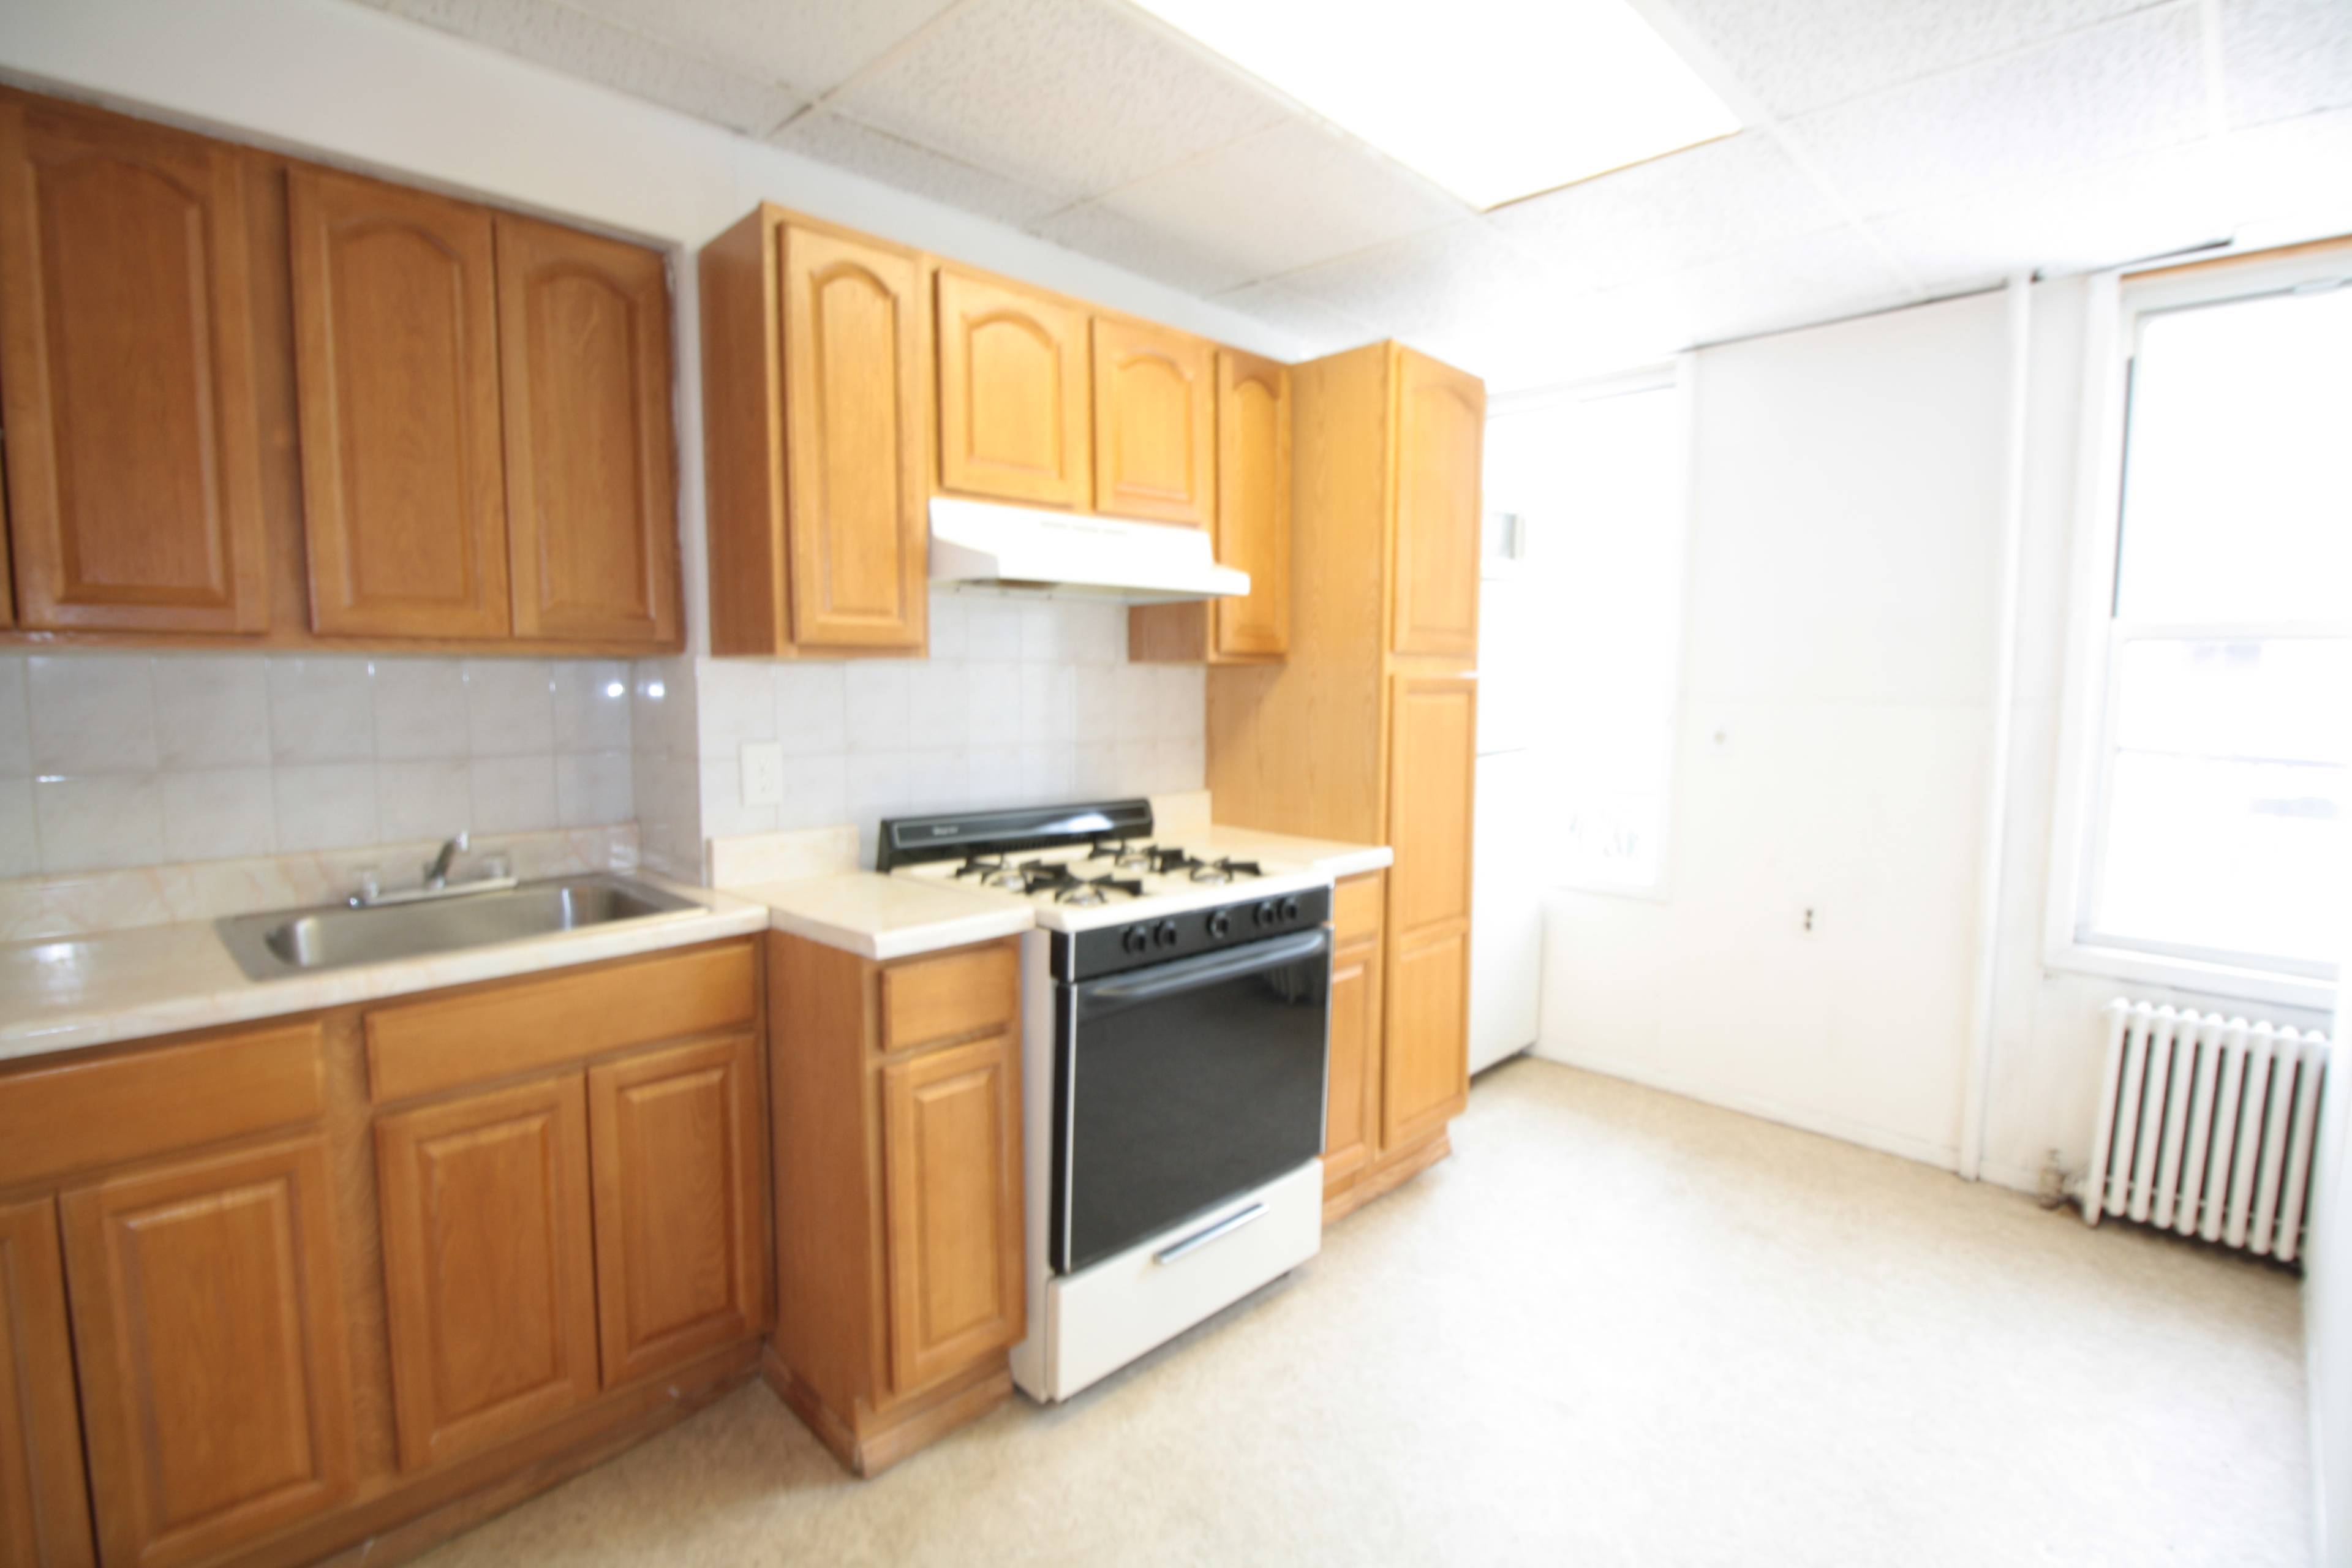 Spacious 1 bedroom apartment in Williamsburg, 2 blocks from the L-Train to Manhattan!